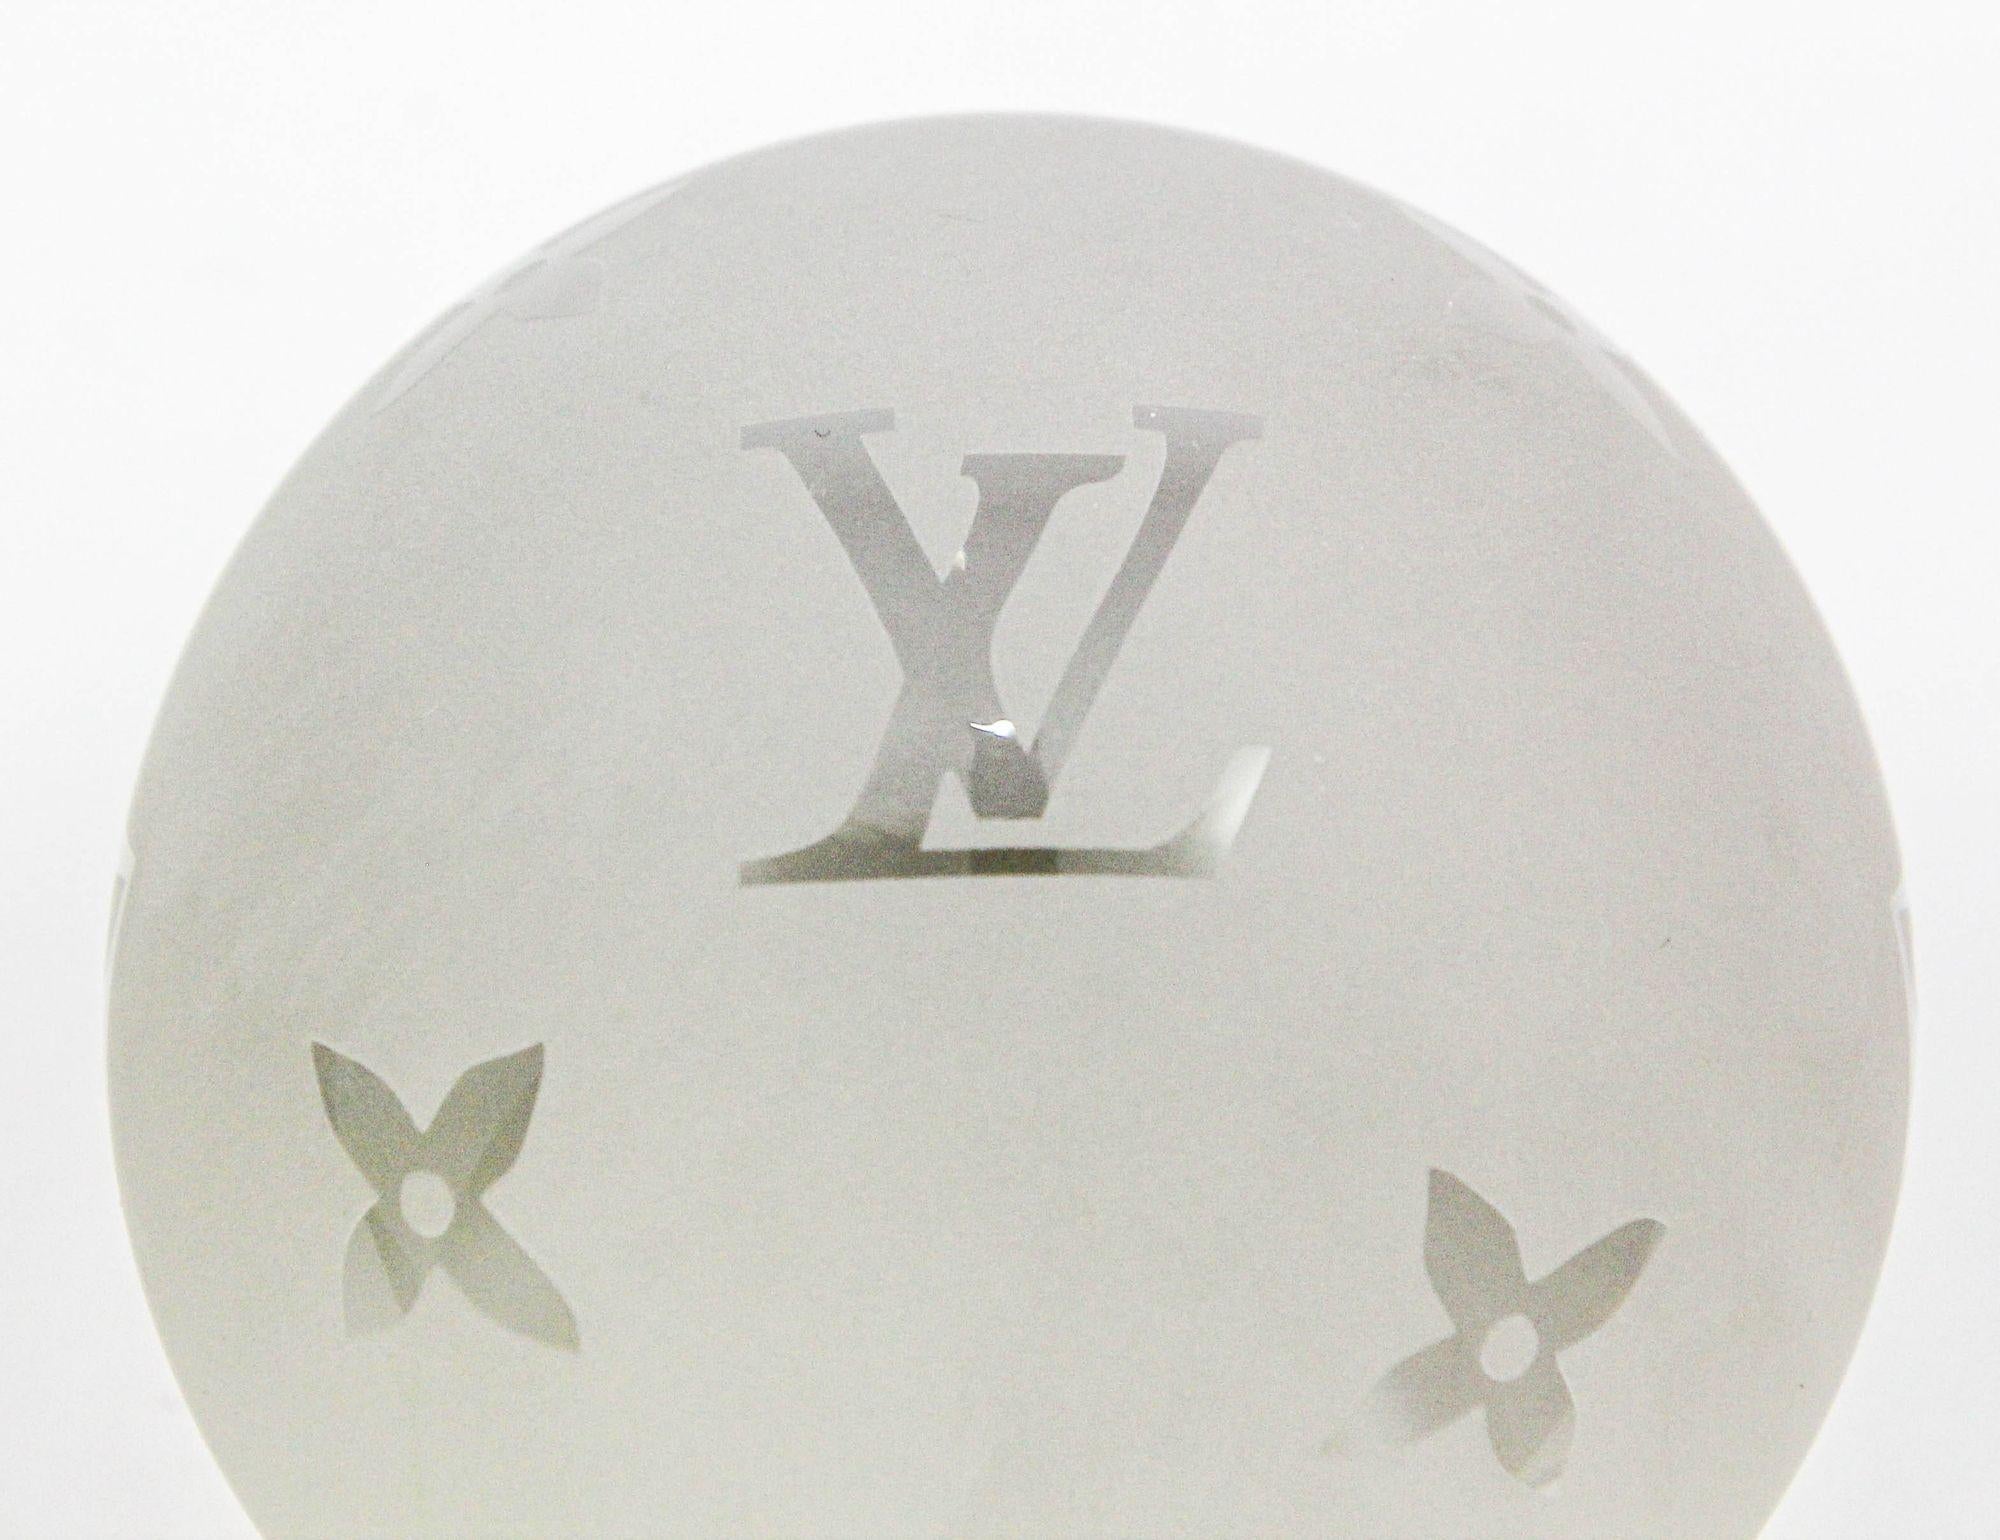 LOUIS VUITTON Paperweight Monogram Clear Crystal Paper Weight 1